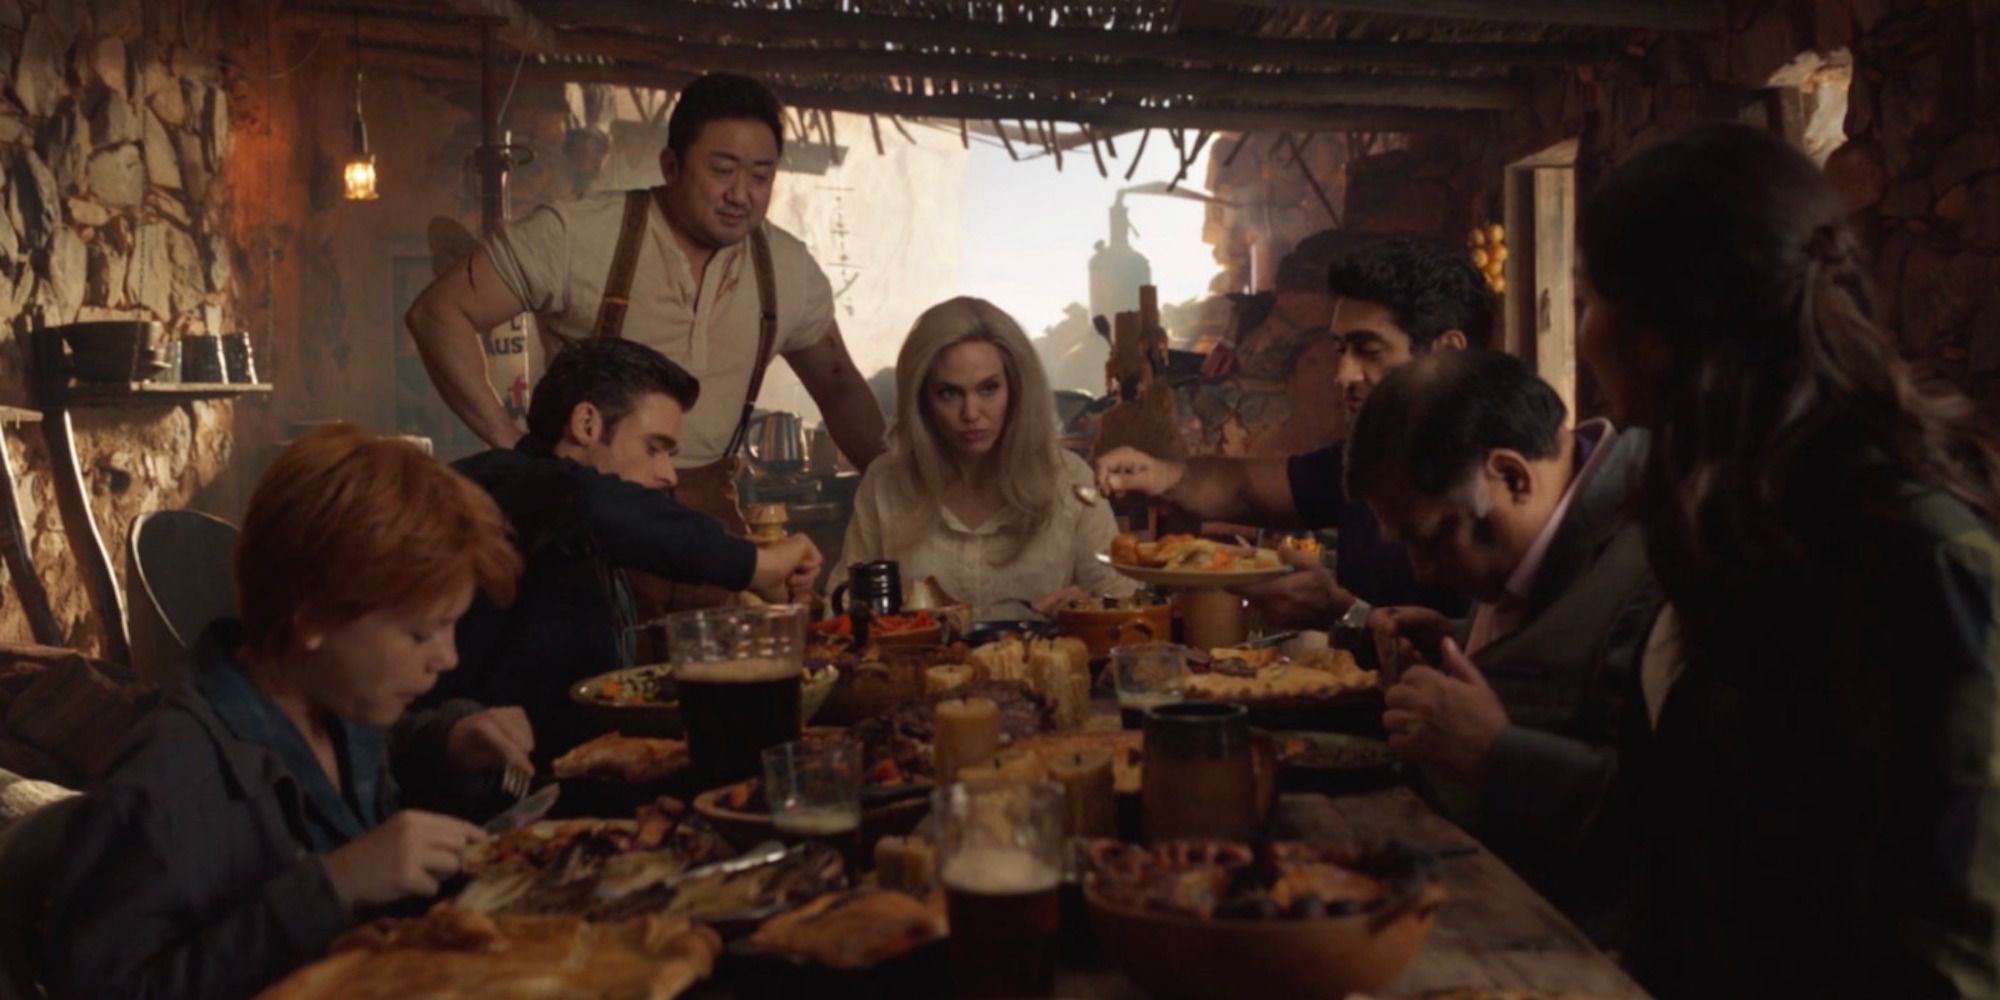 A dinner scene featuring multiple characters from Eternals